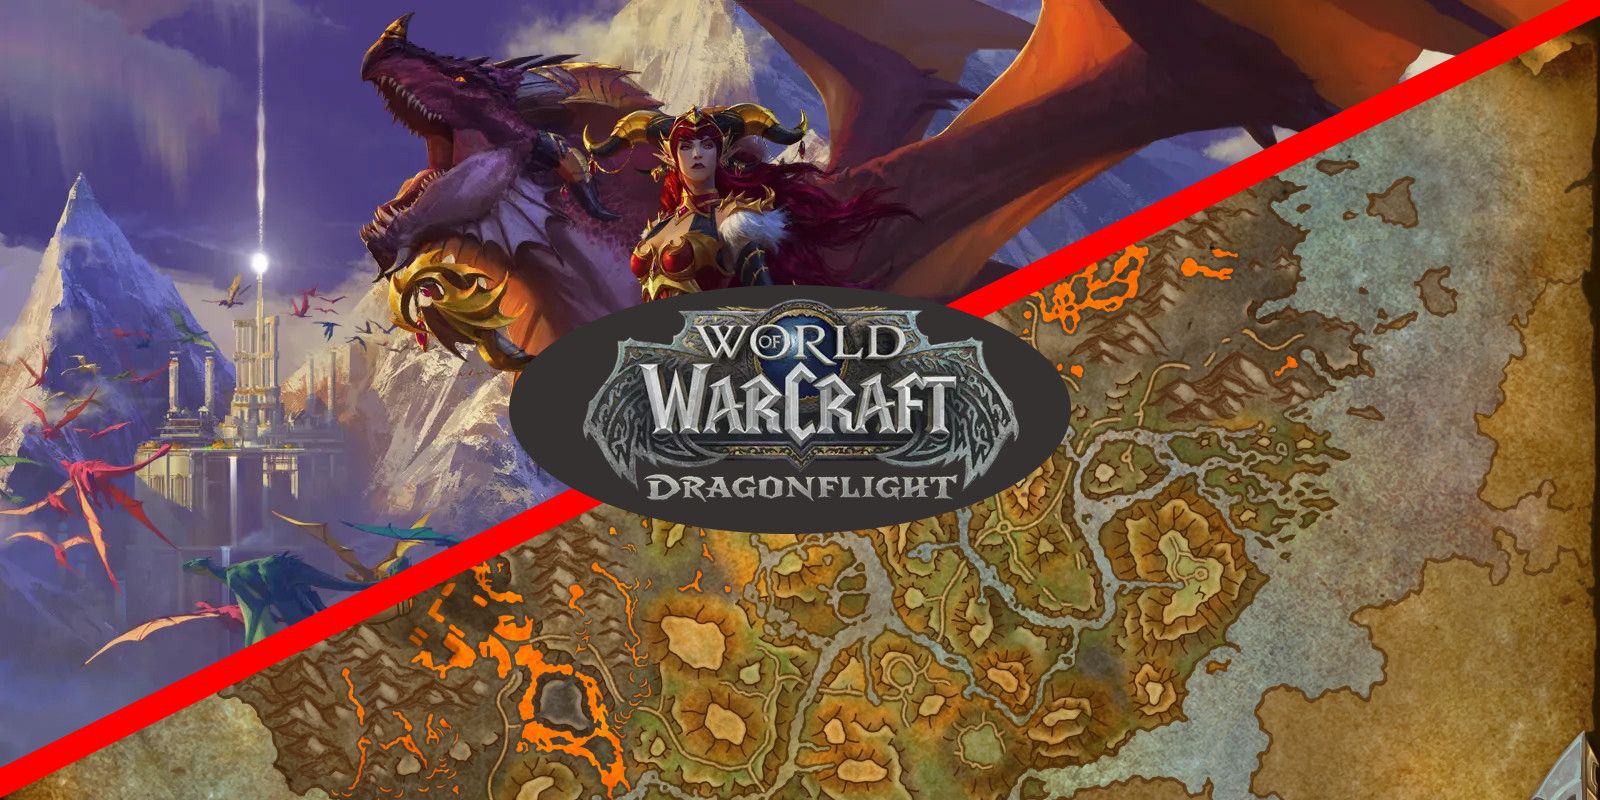 World of Warcraft: Dragonflight logo, ontop of a red line dividing an image of Alexstrasza in her human and dragon forms, and a map of The Waking Shores